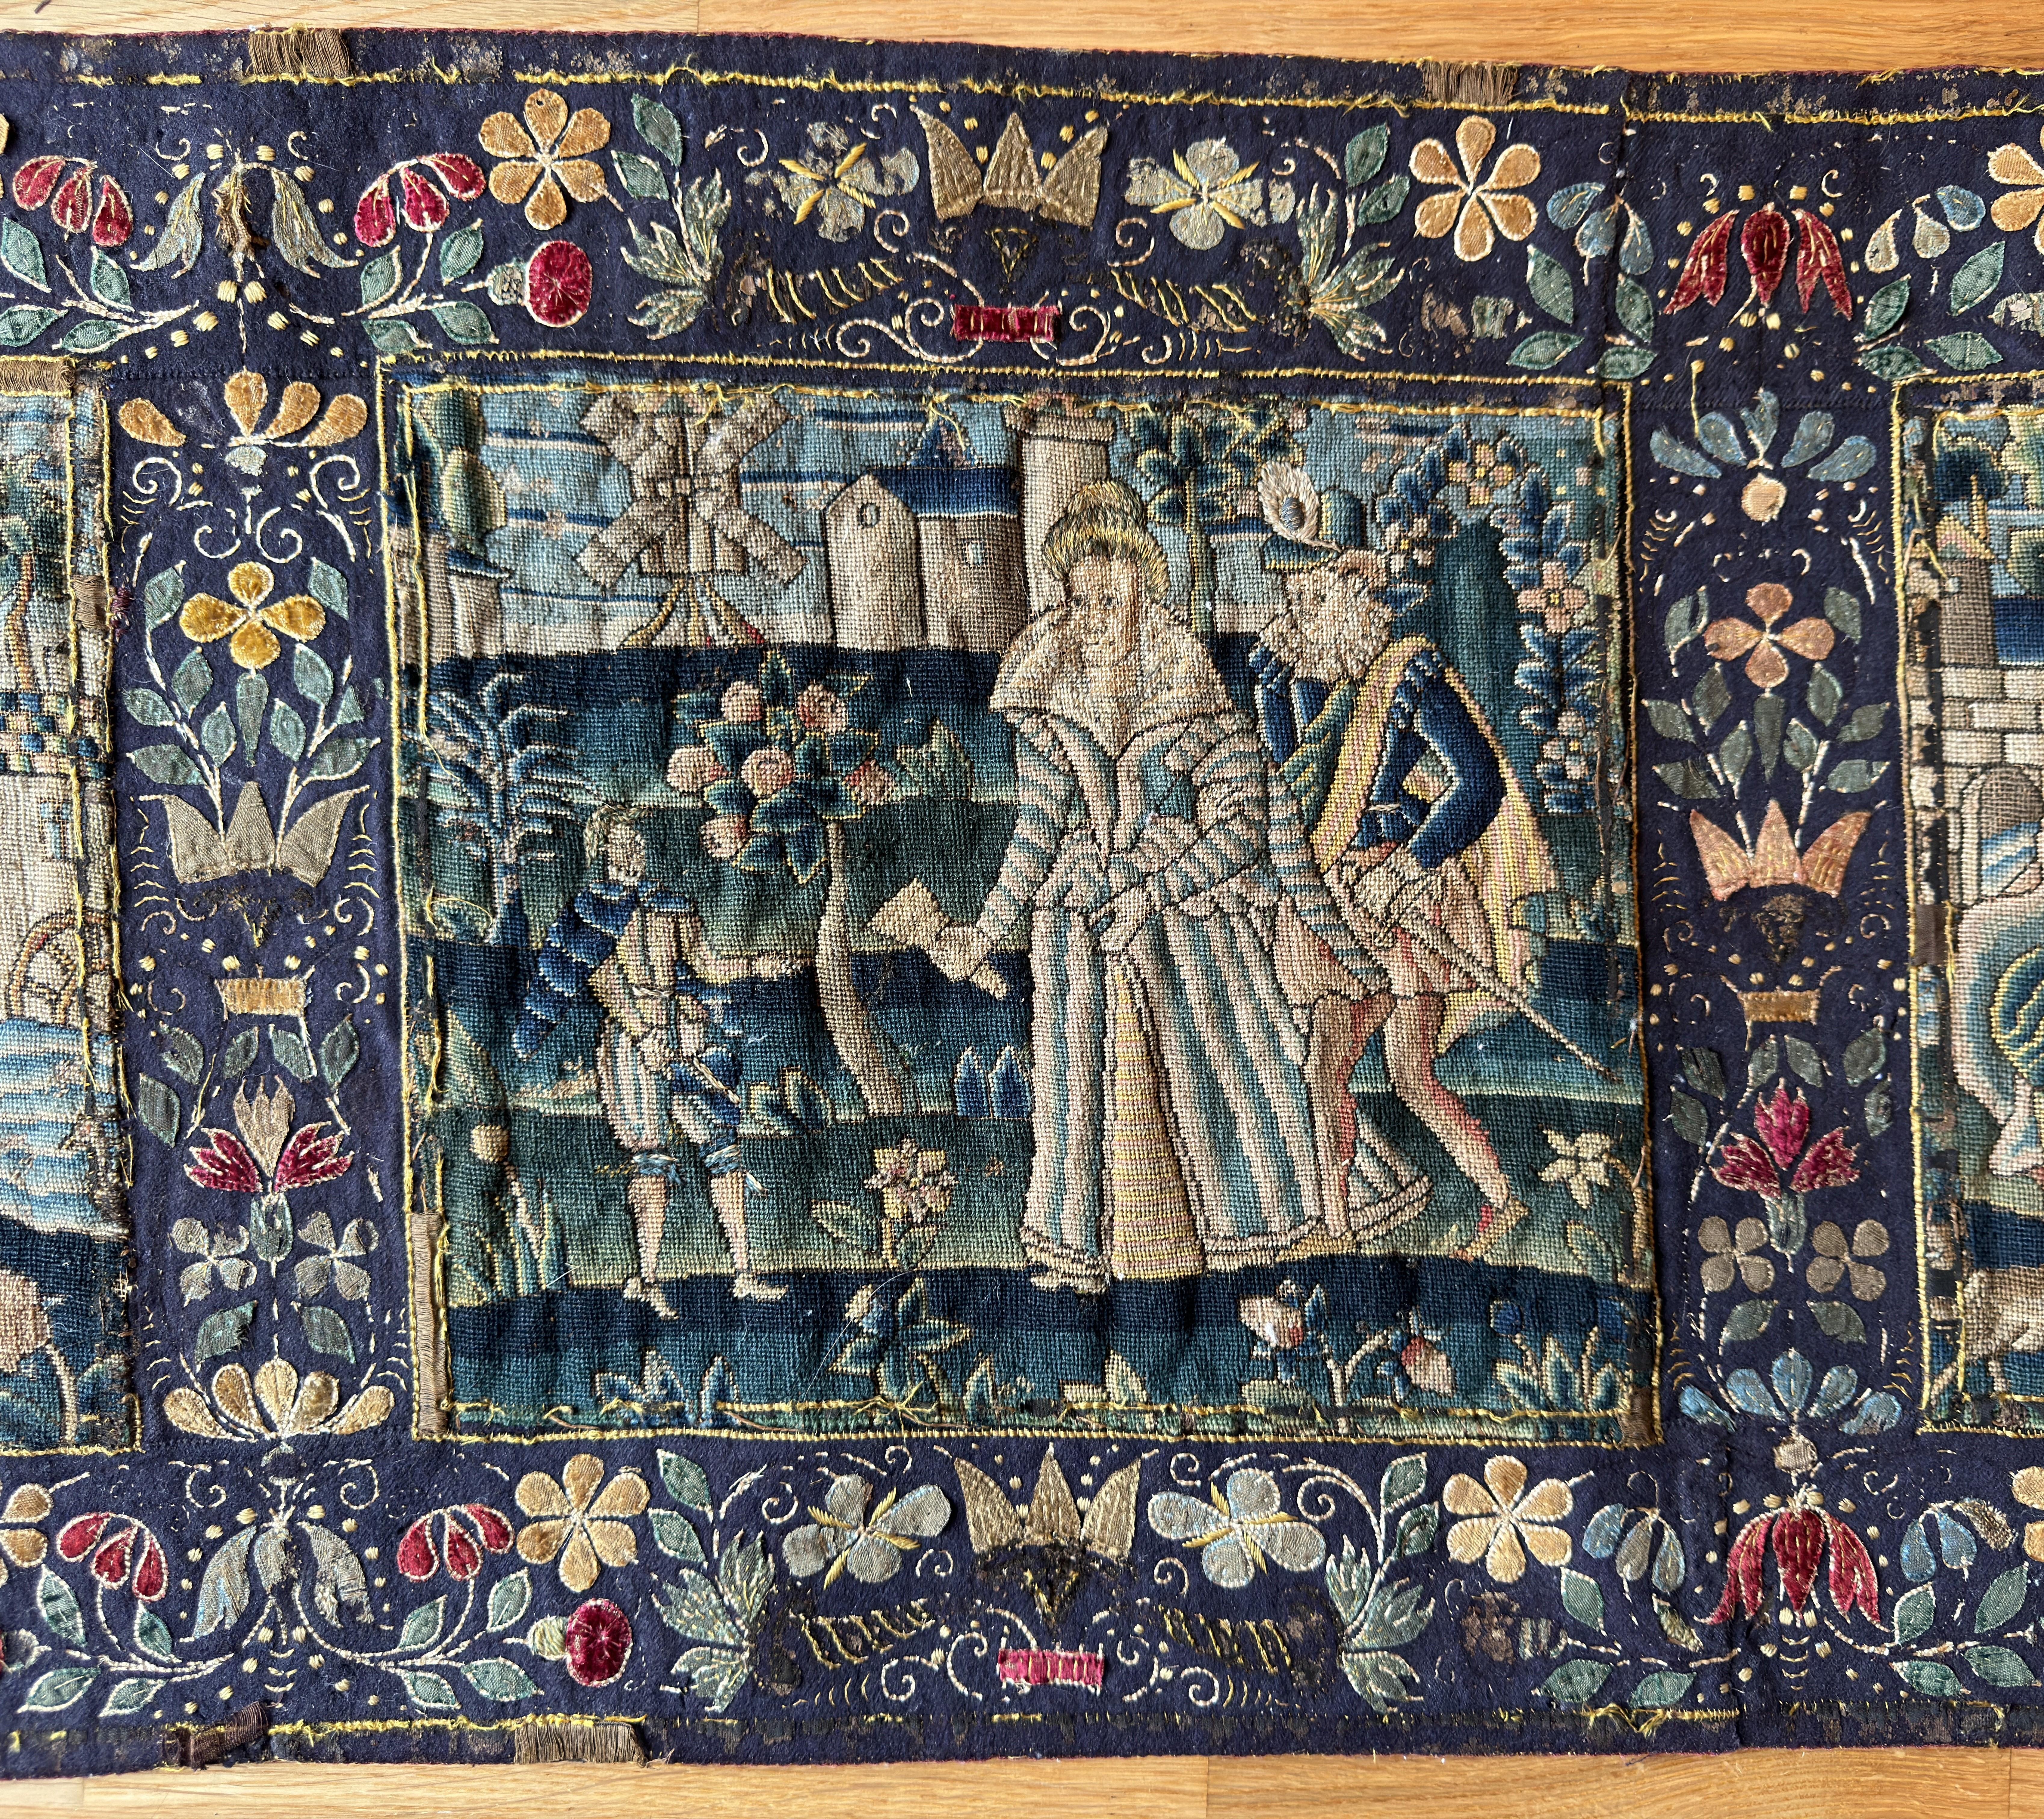 An exceptional and fine 17th Century English Needlework Panel. The long panel worked in richly coloured threads and subdivided into 5 narrative figural panels framed in an applied border of trailing flowers. 

16.5 inches (34cm) x 75.5 inches (192